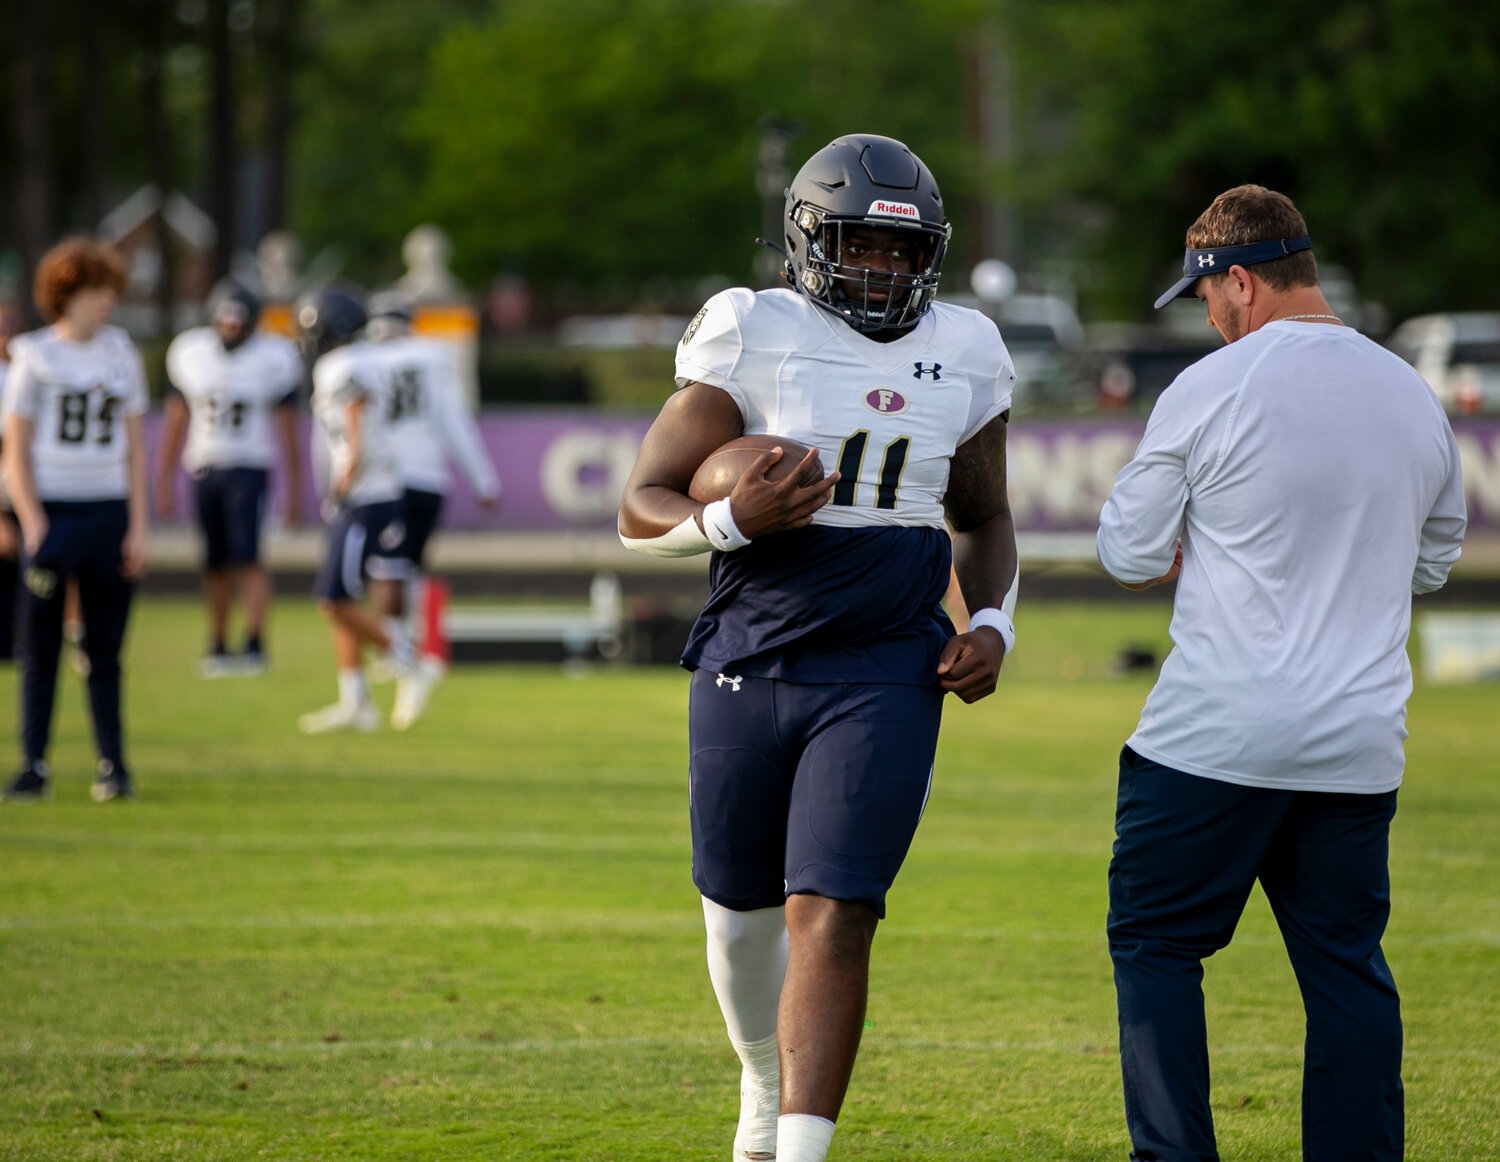 Foley senior running back Kolton Nero warms up for action in Daphne before the Lions’ spring game against the Trojans on May 19. Through four games, Nero’s 937 rushing yards sat third in MaxPreps’ state rankings behind only two athletes with an extra game played.